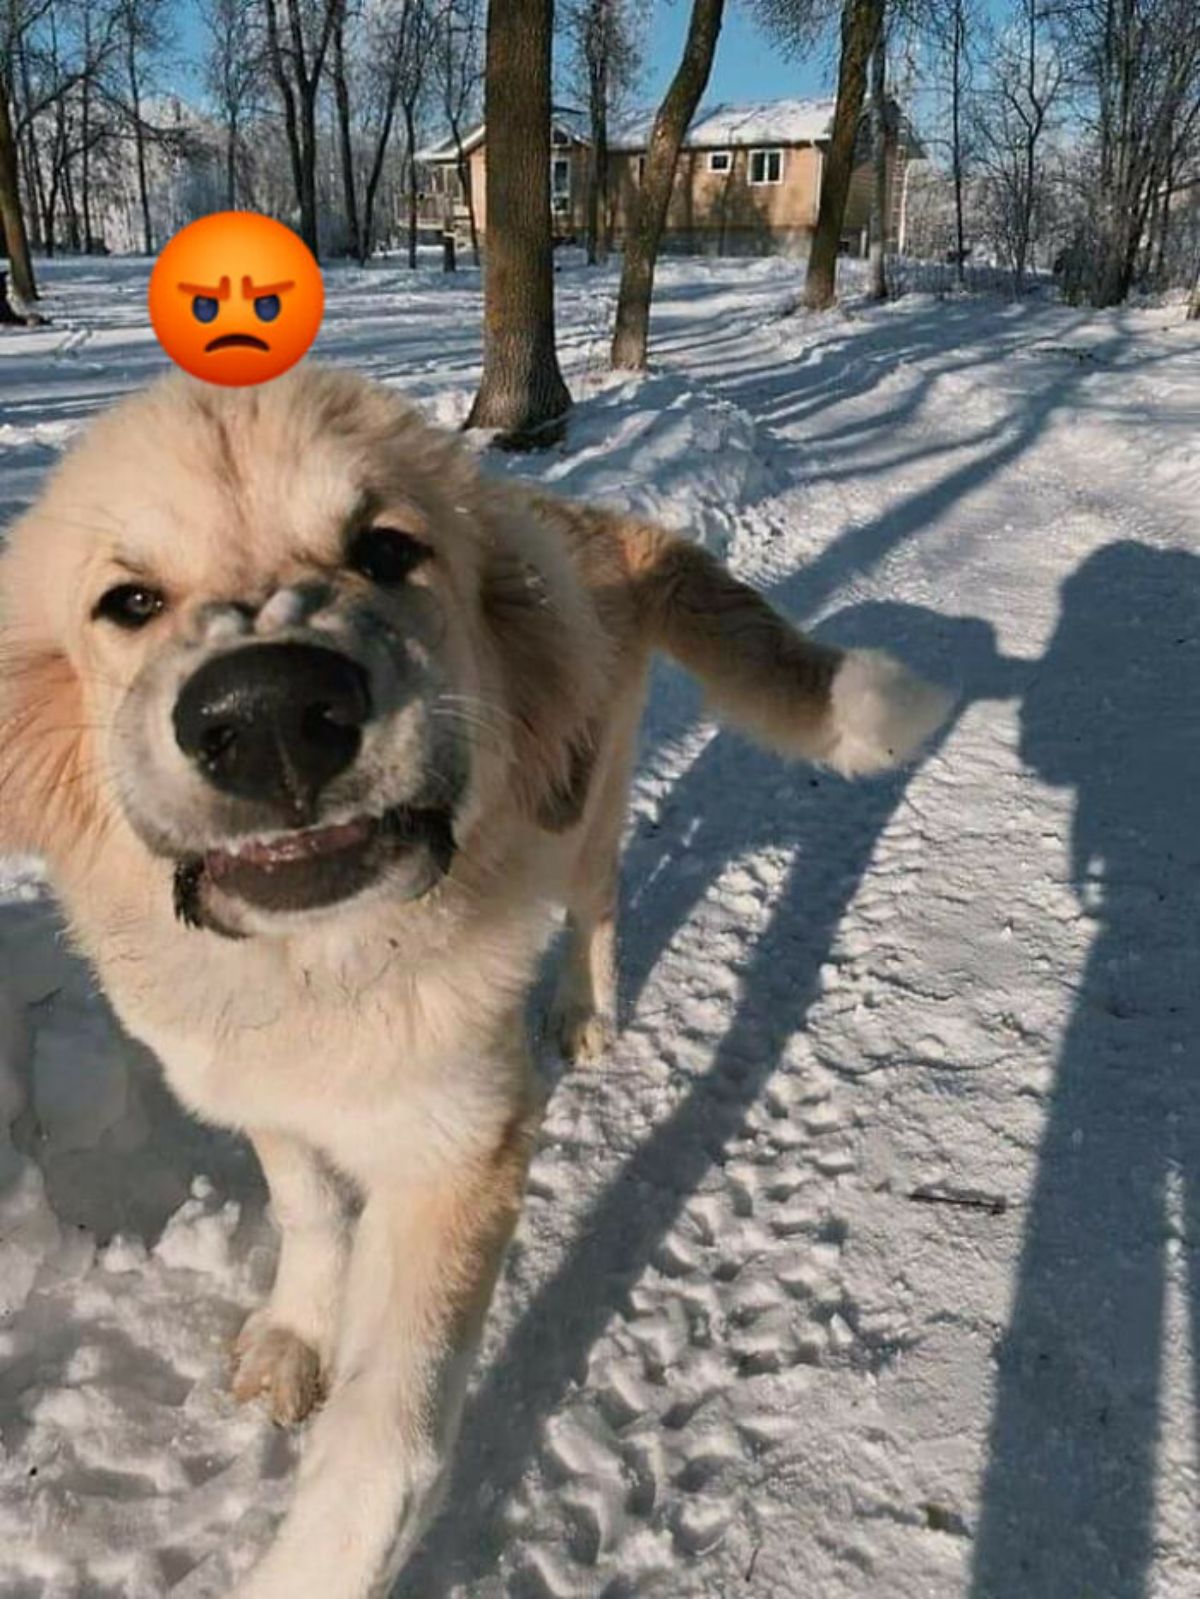 brown dog standing in snow looking angry at the camera with an angry face emoji placed over the dog's head